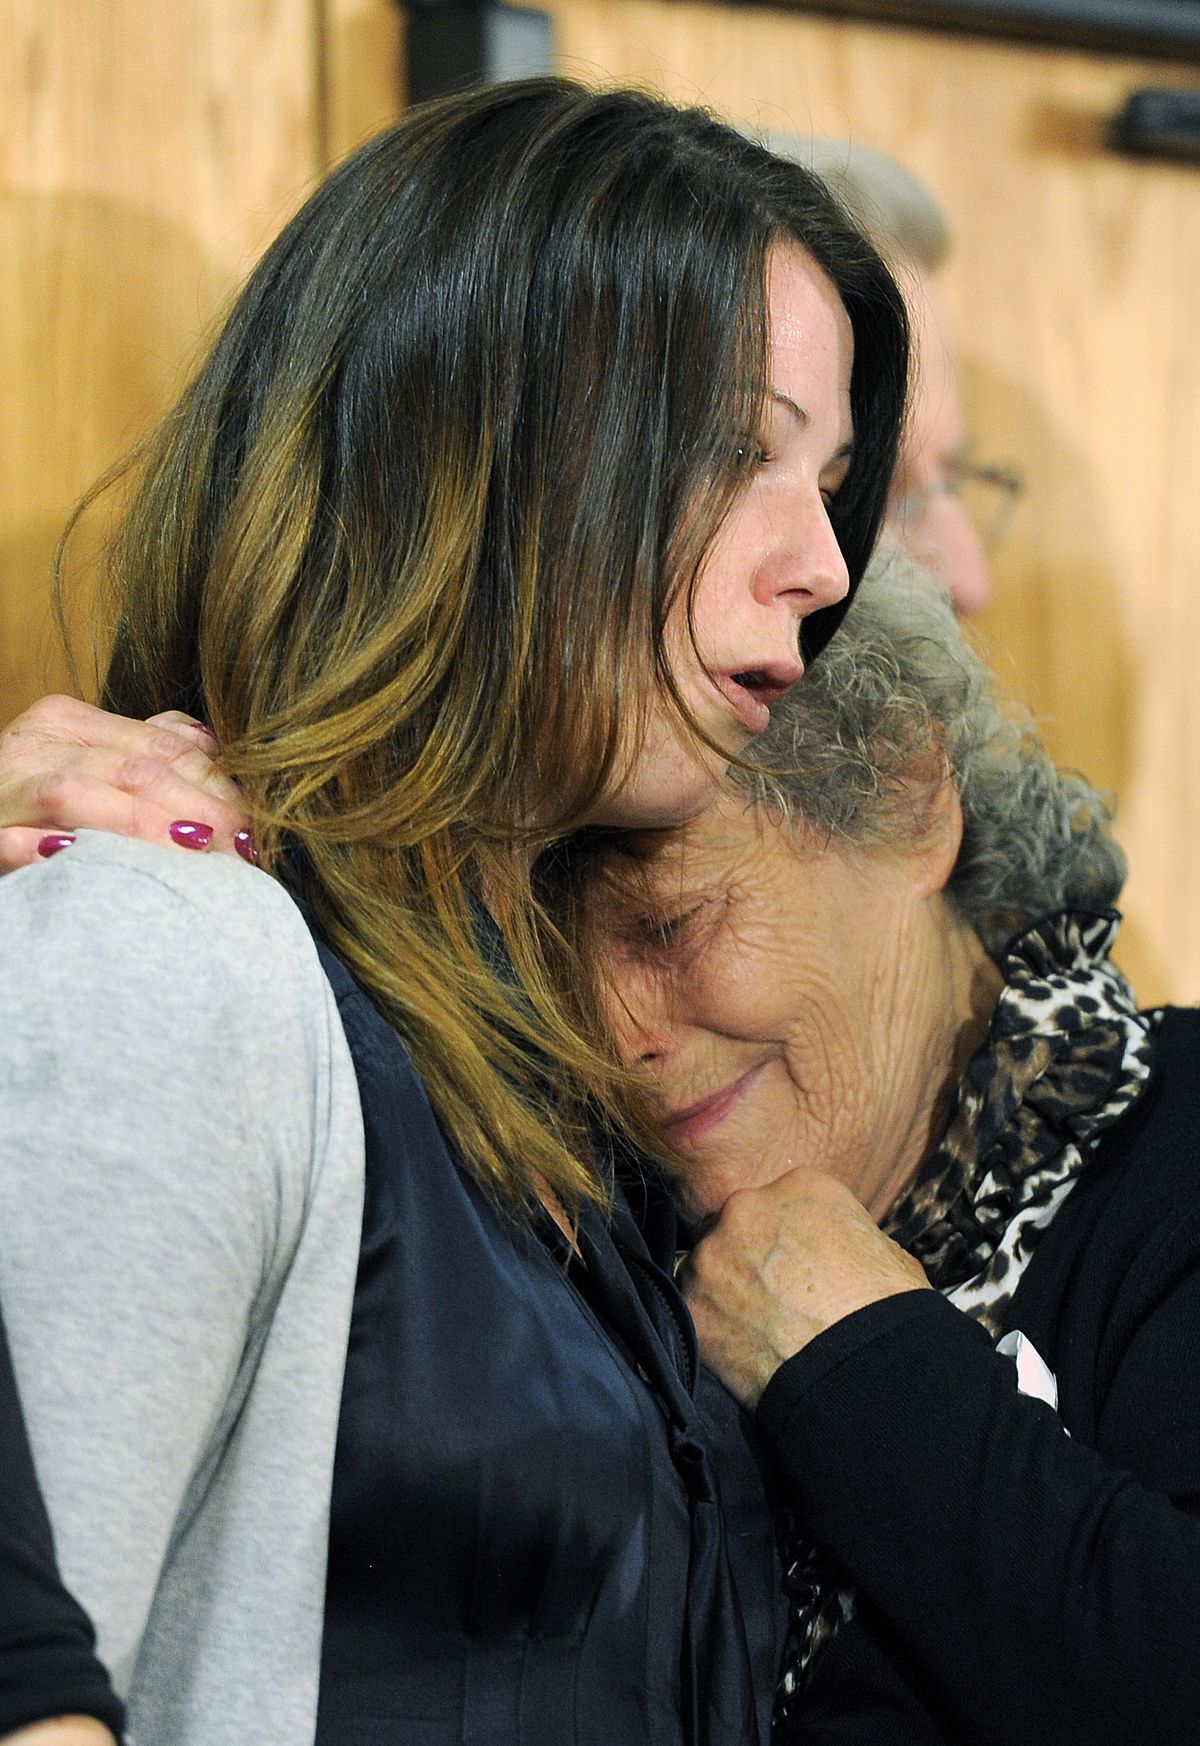 Marlene Knobbe, right, hugs her granddaughter Amanda Medek, left, at a press conference bu families of victims in the Colorado theater shooting in Aurora, Colo., on Tuesday, Aug. 28, 2012. Amanda lost her sister Micayla Medek in the shooting. Families of some of the 12 people killed in the Colorado theater shooting are upset with the way the millions of dollars raised since the tragedy are being distributed. (Chris Schneider / Fr170036 Ap)